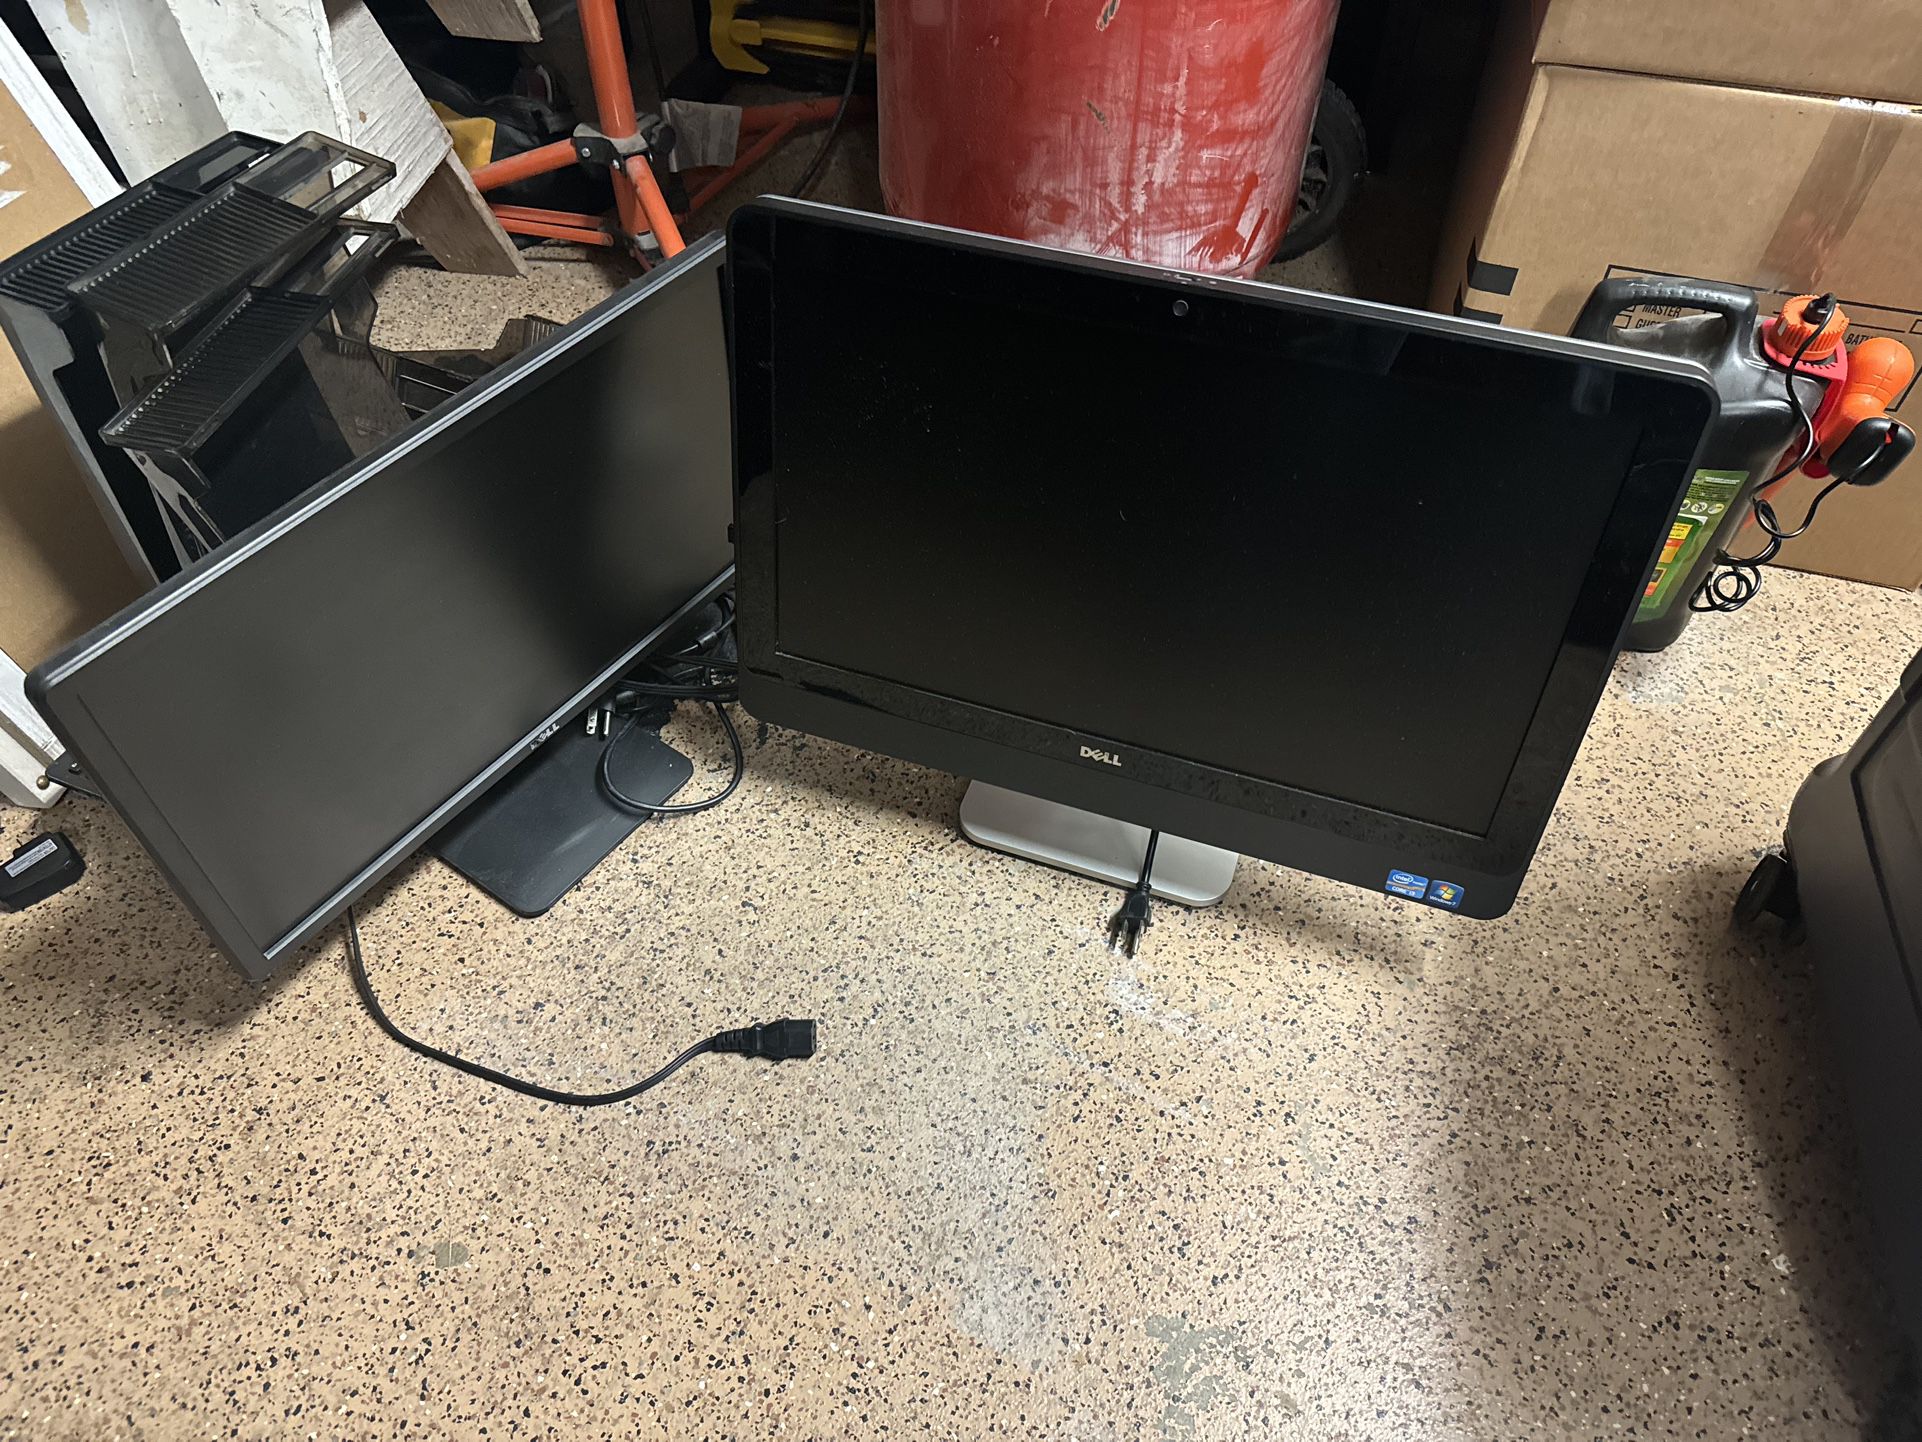 Dell i3 computer with second screen